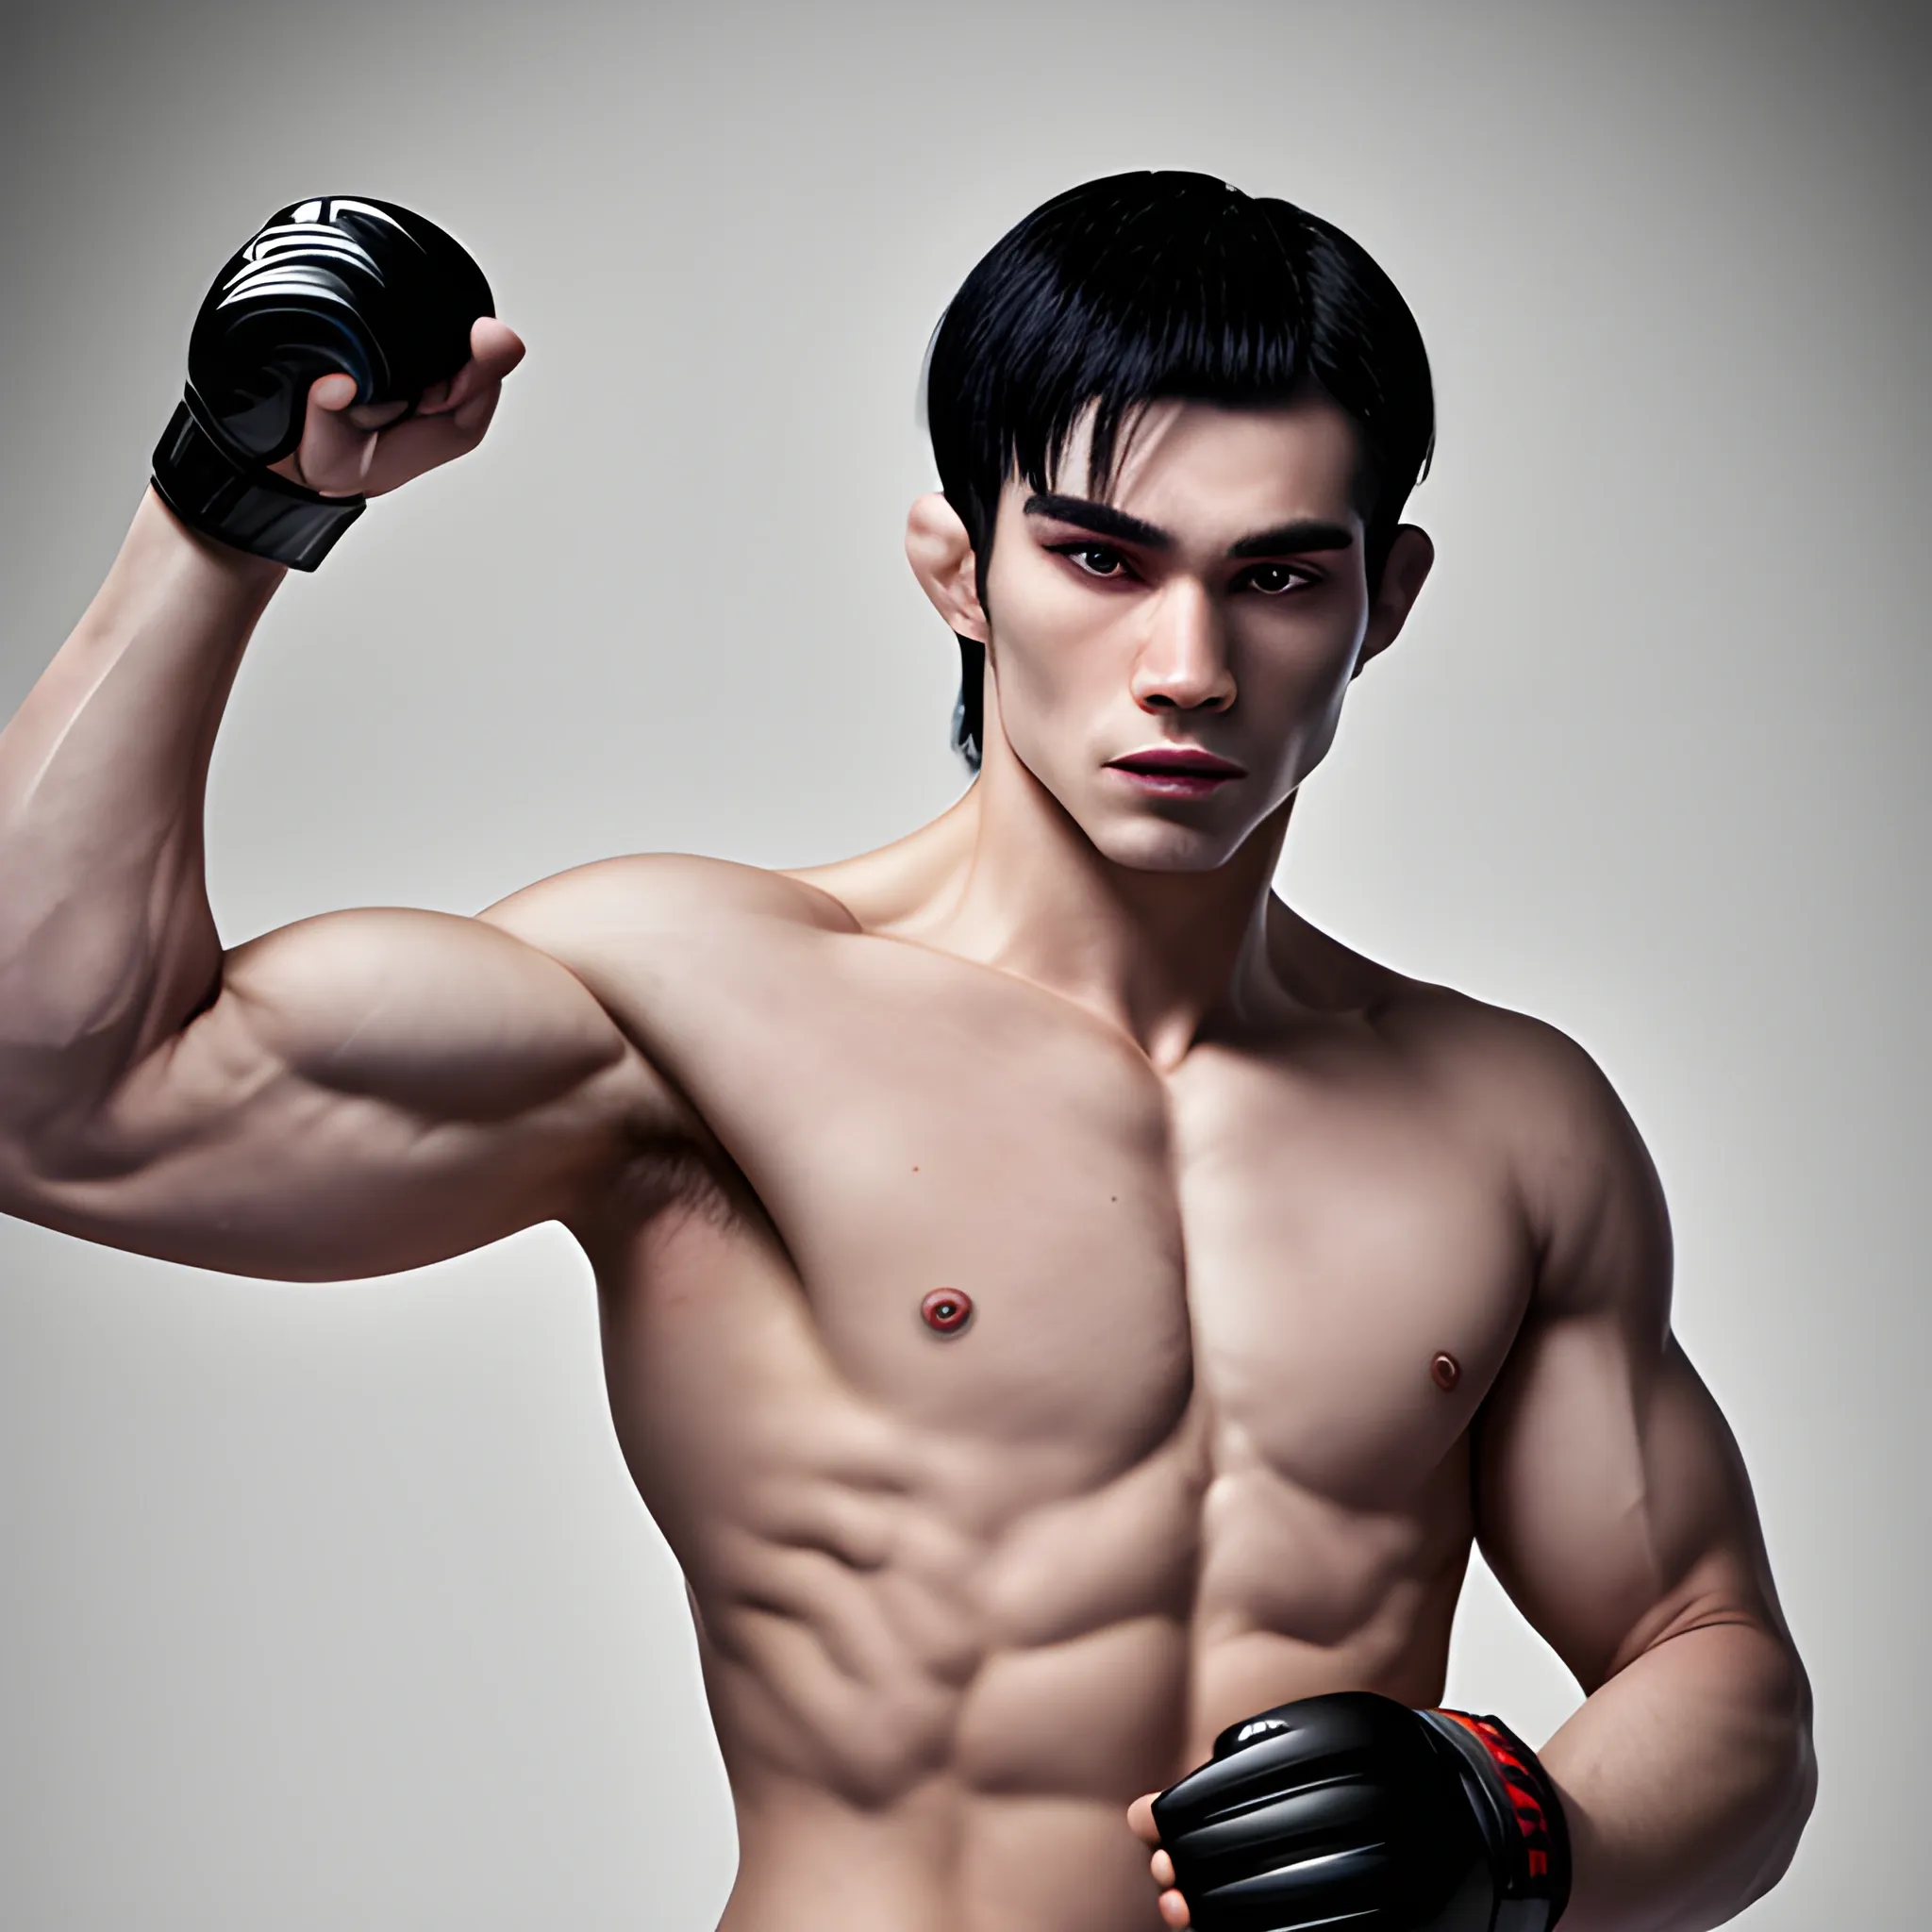 handsome russian men,  black hair, good hand, 4k, best quality, sharp focus, soft lighting, skinny,  1men, ideal body, training body, slim fit, view from front, medium, short pant, UFC fighter pose, face advanced, face detail, negative_hand-neg:1.2, 
